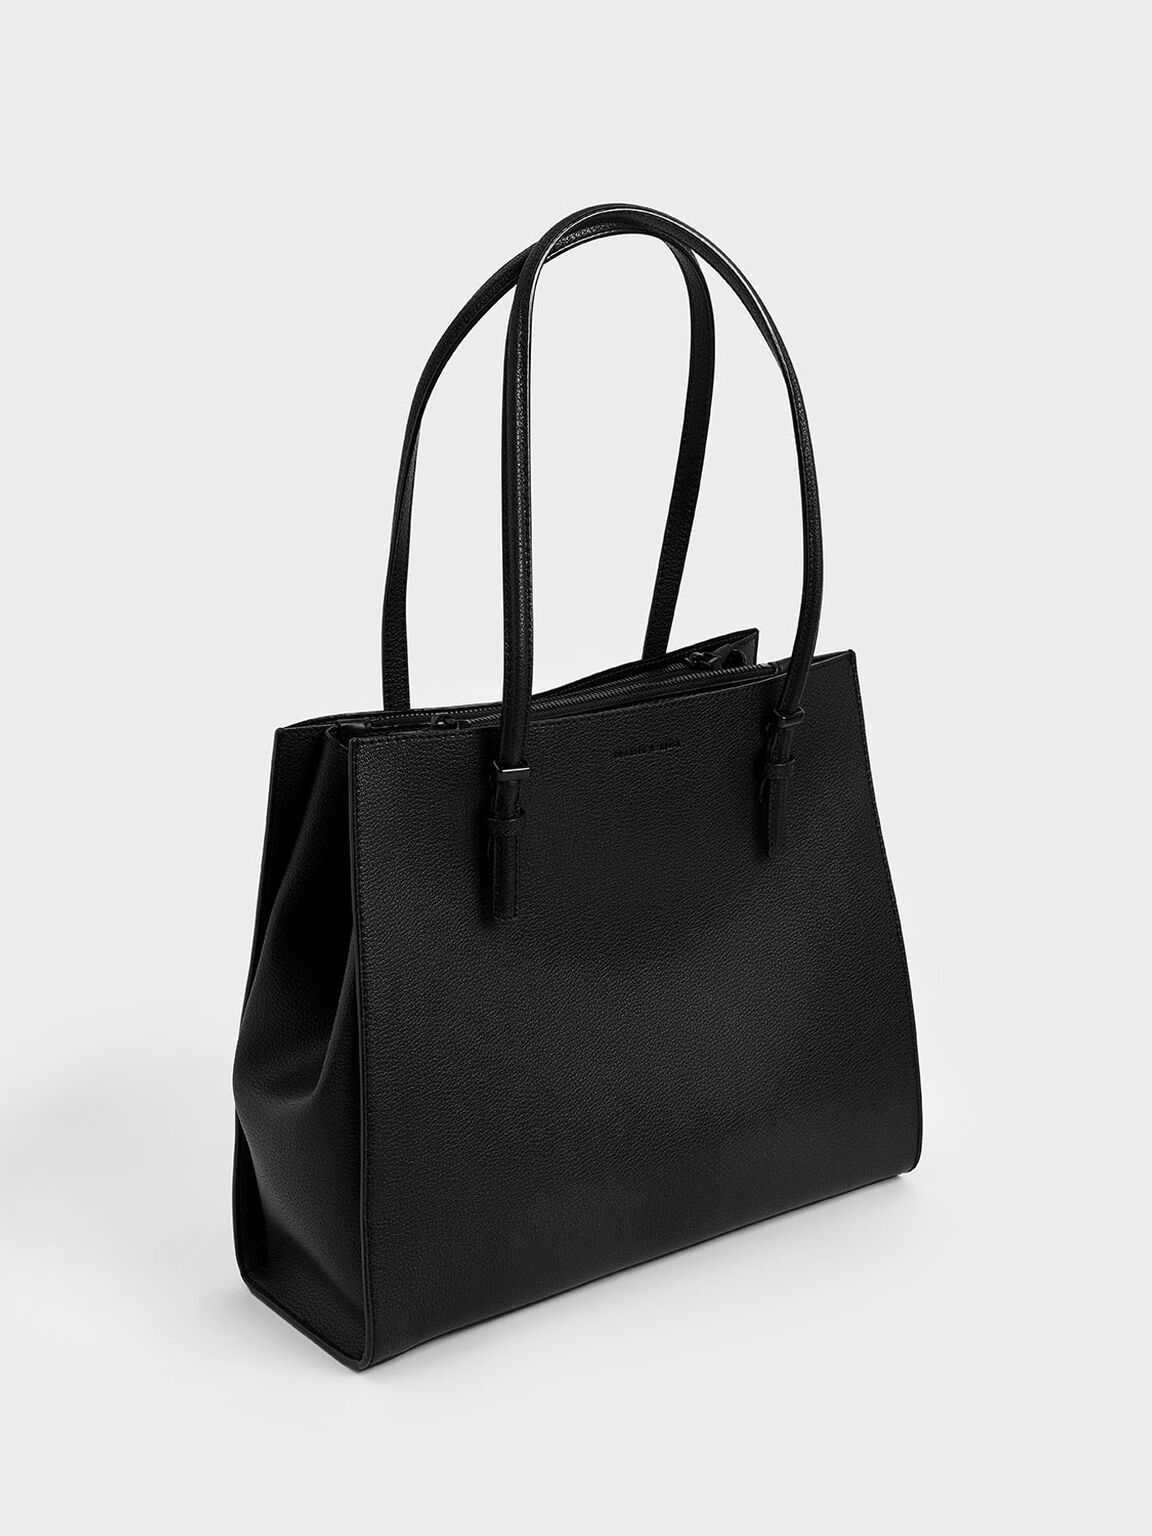 Ultra matte Black Double Handle Tote Bag - CHARLES & KEITH ID